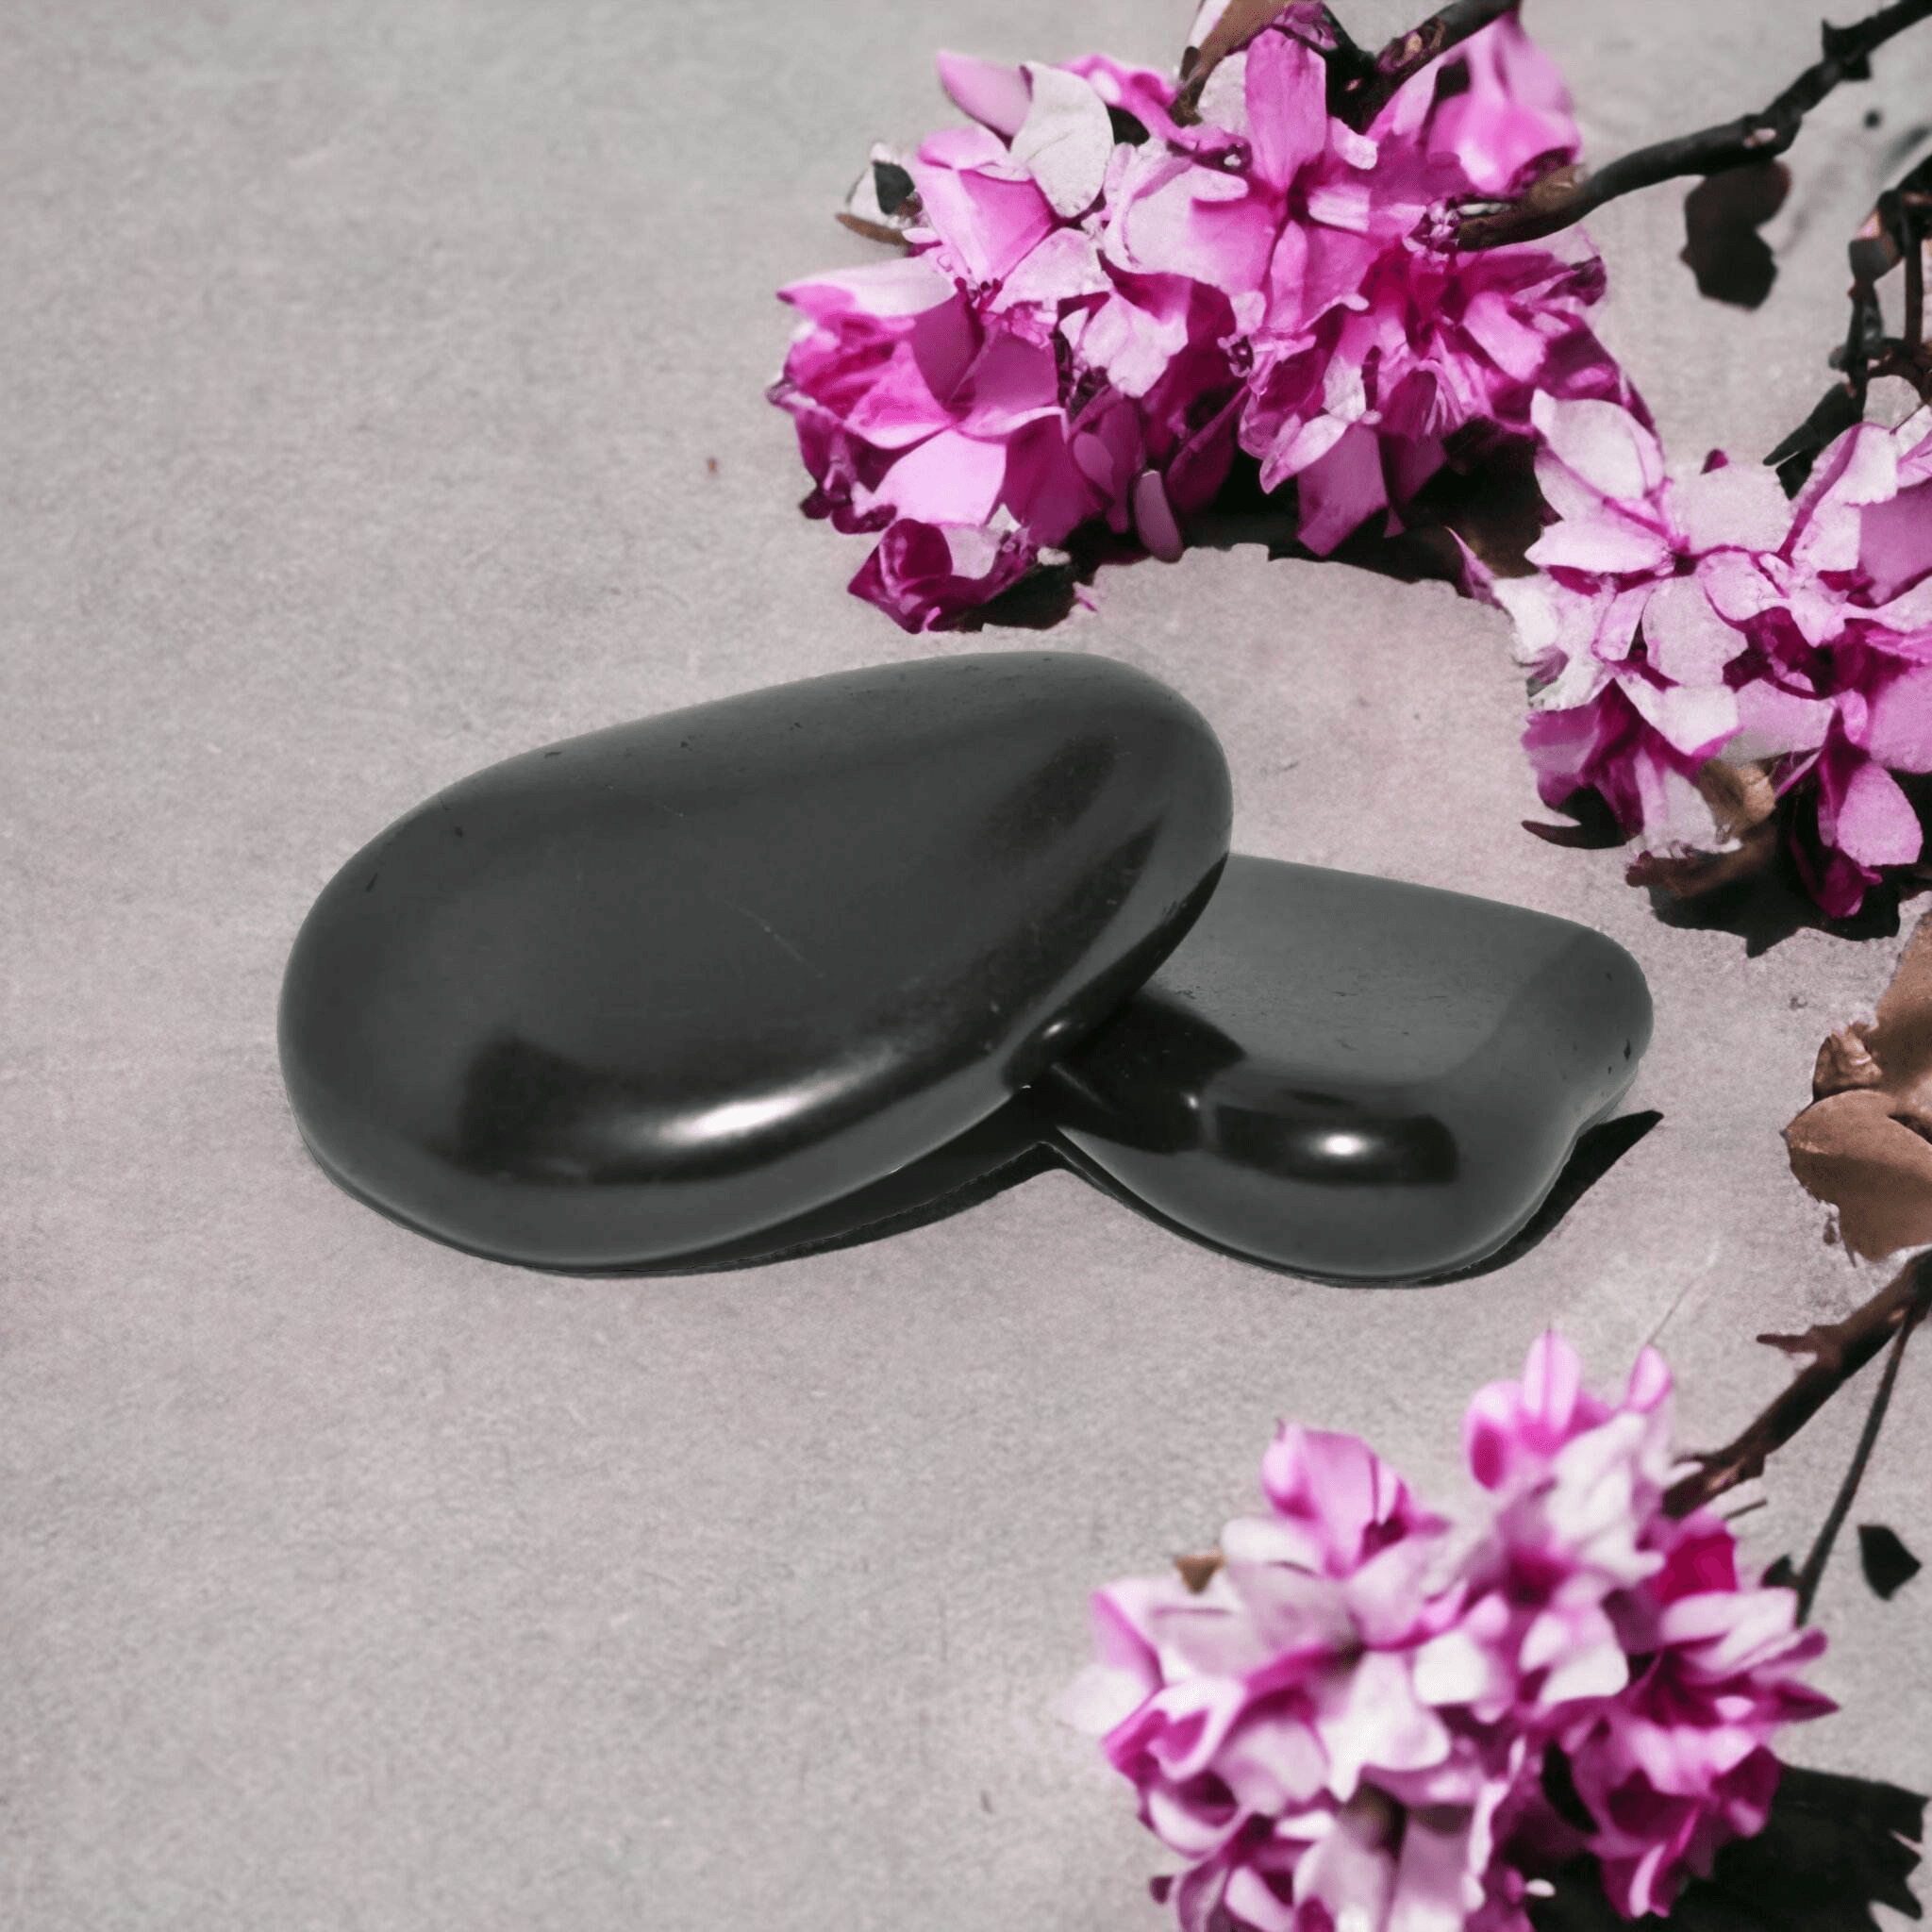 Shungite stones with cherry blossoms